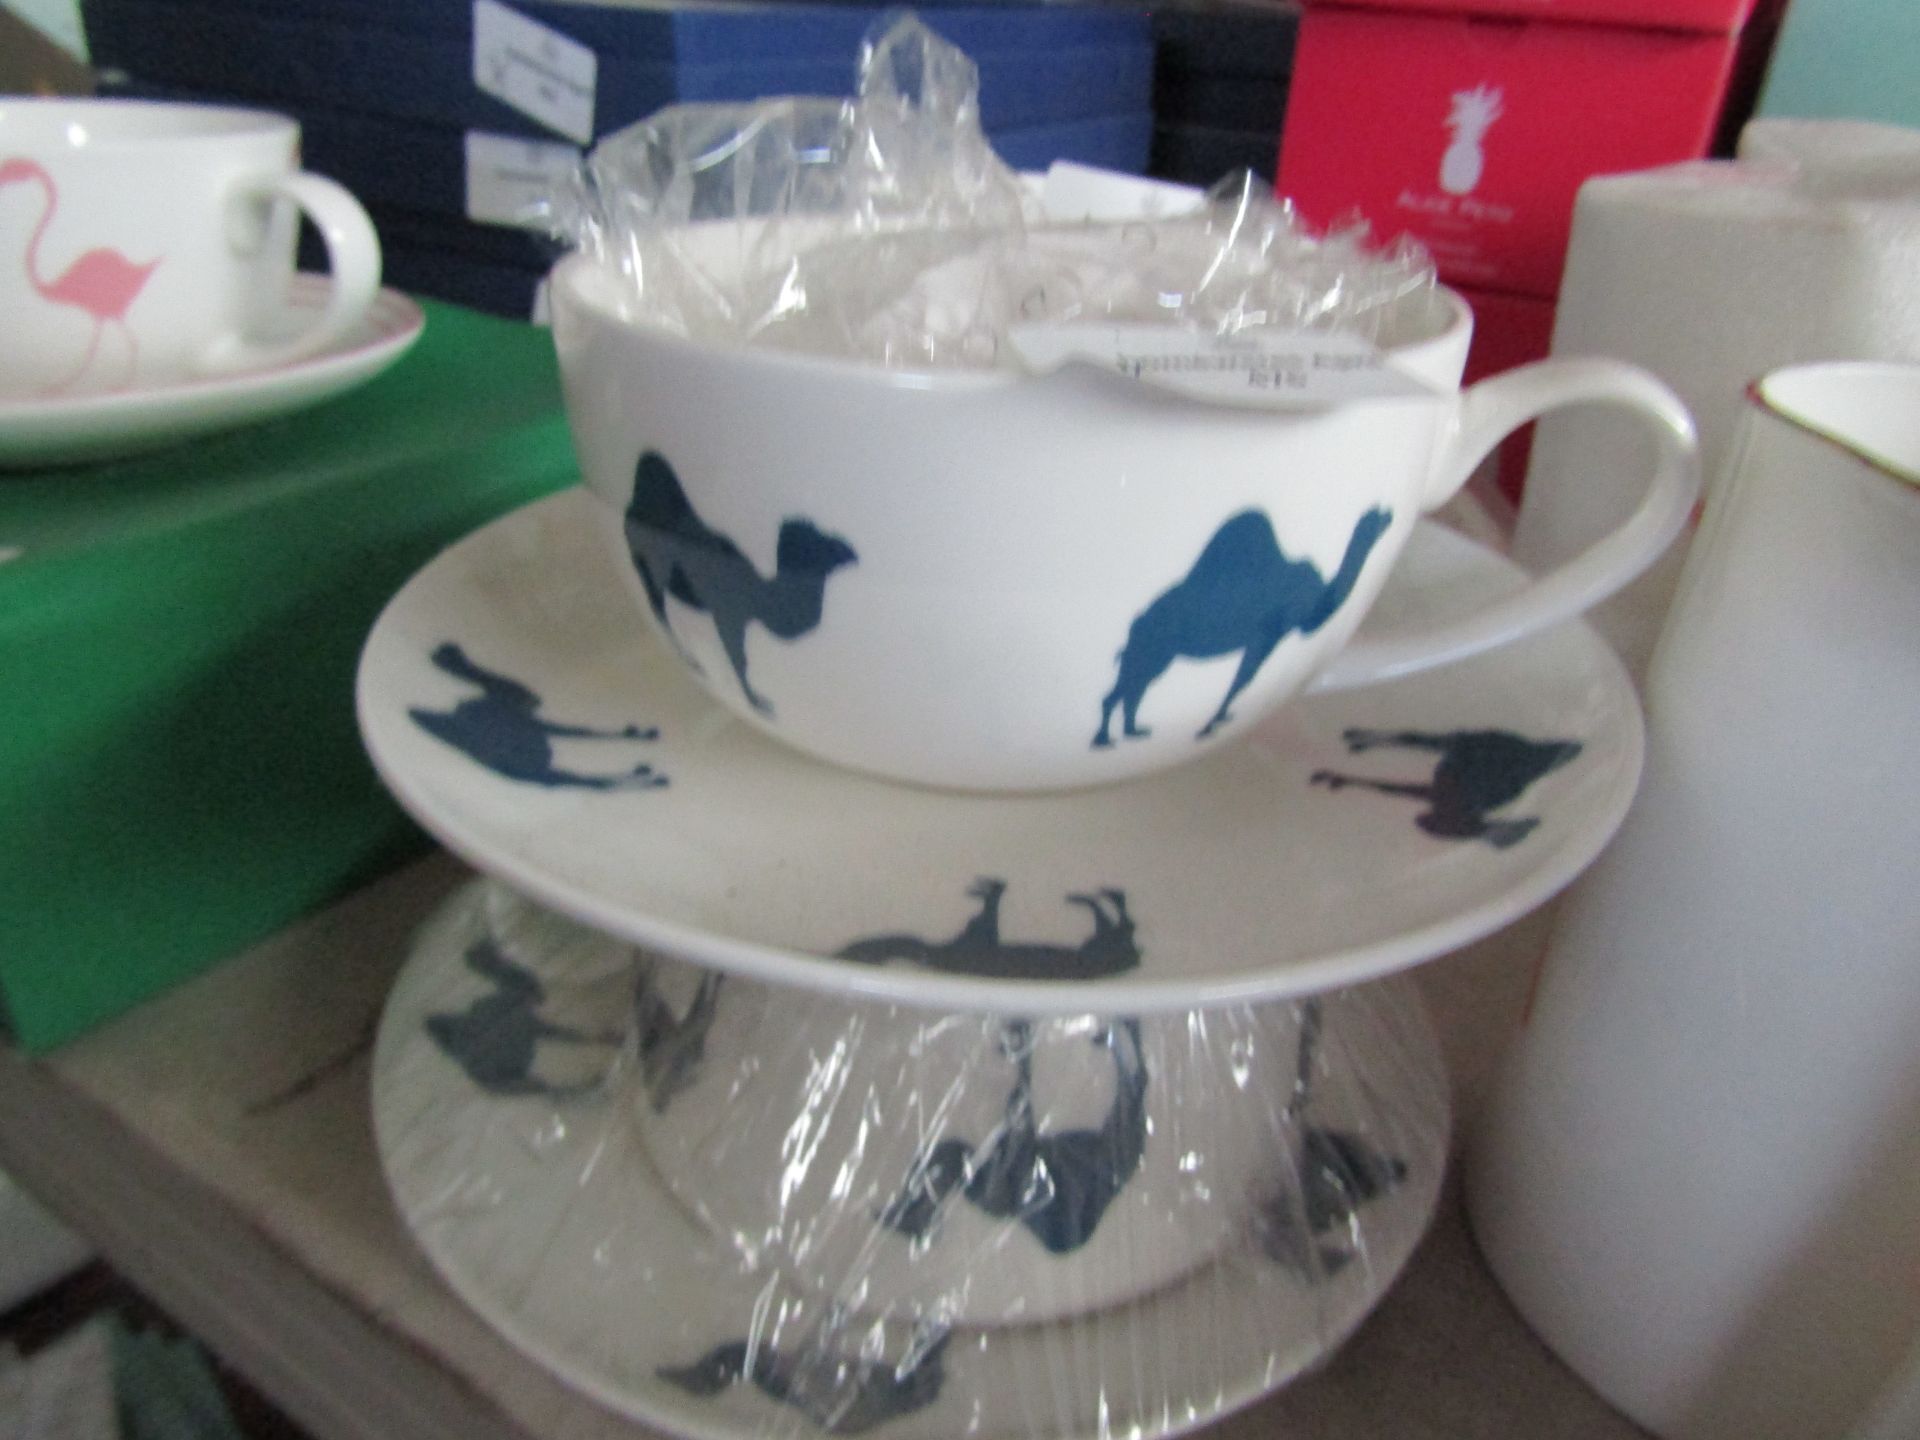 2 x Homeware Outlet Ex-Retail Customer Returns Mixed Lot - Total RRP est. 60About the Product(s)This